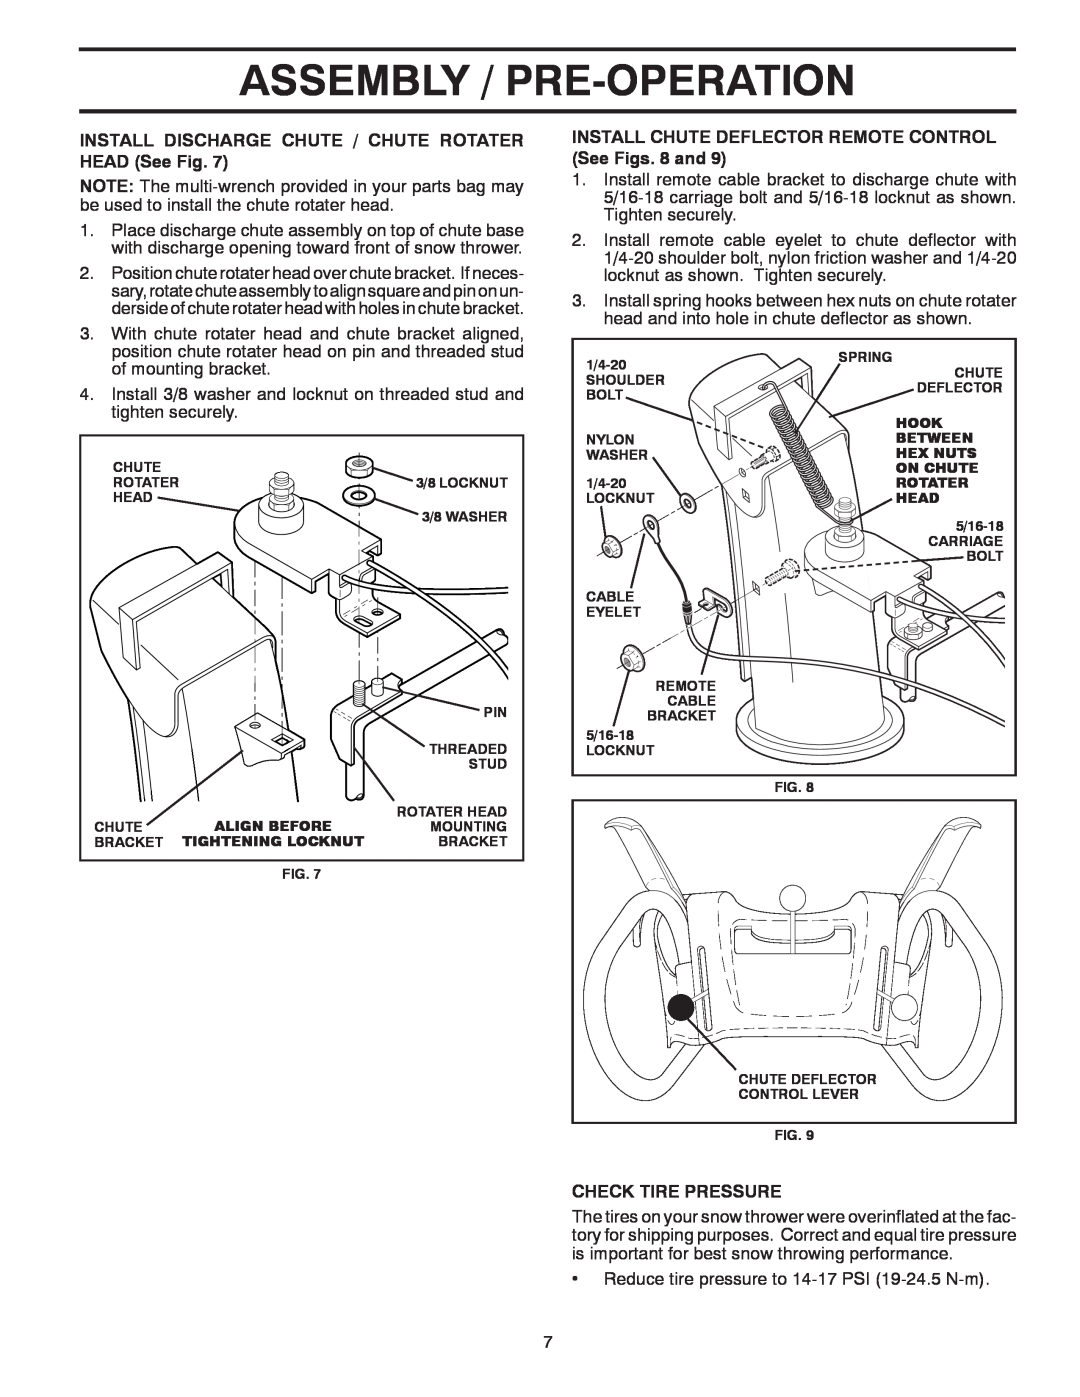 Poulan 421916 owner manual Assembly / Pre-Operation, Check Tire Pressure 